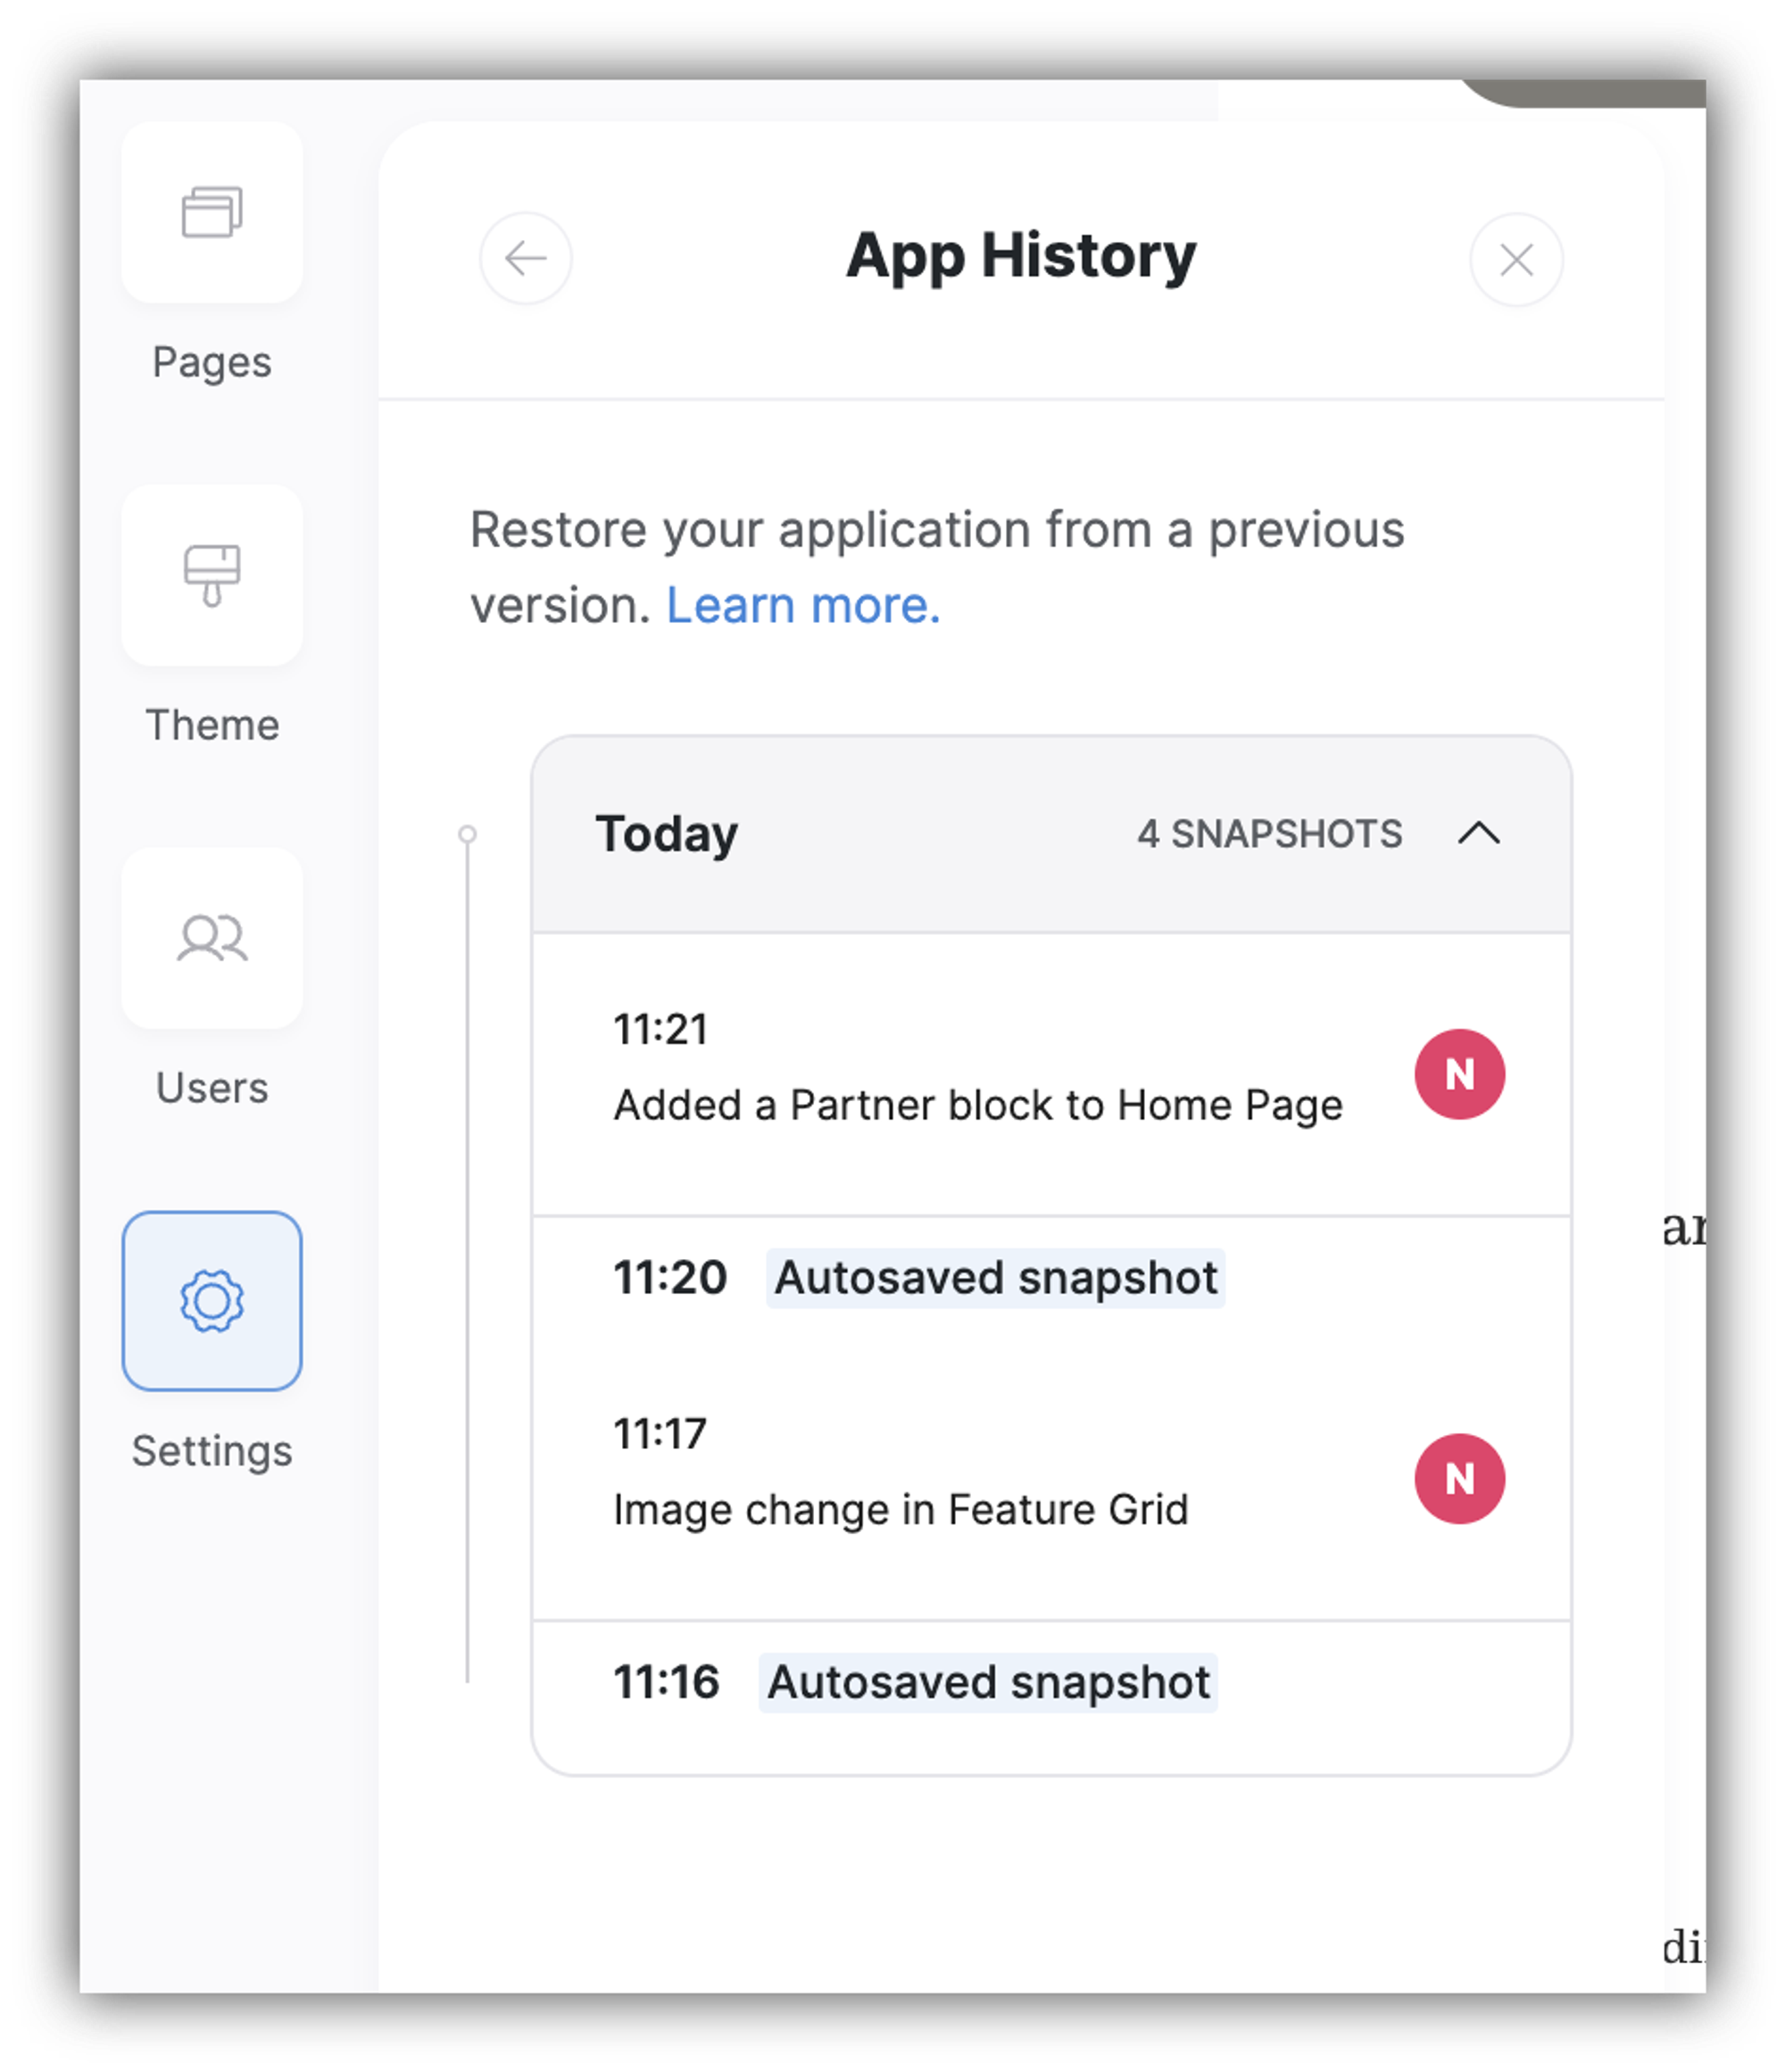 Autosaved and manual snapshots in the App History